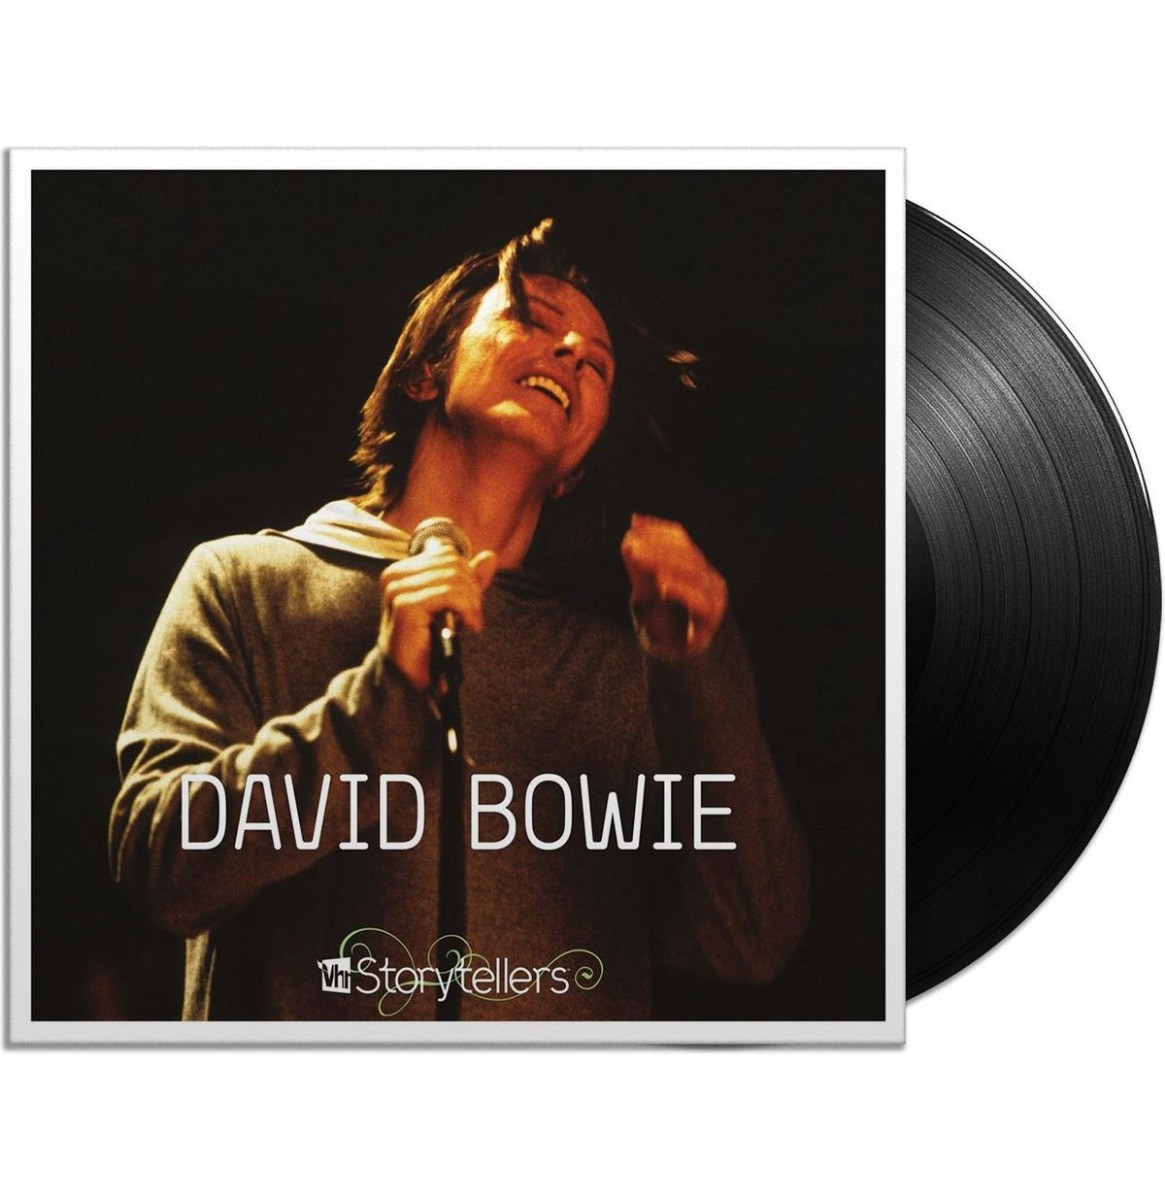 David Bowie - VH1 Storytellers (Limited Edition) 2LP